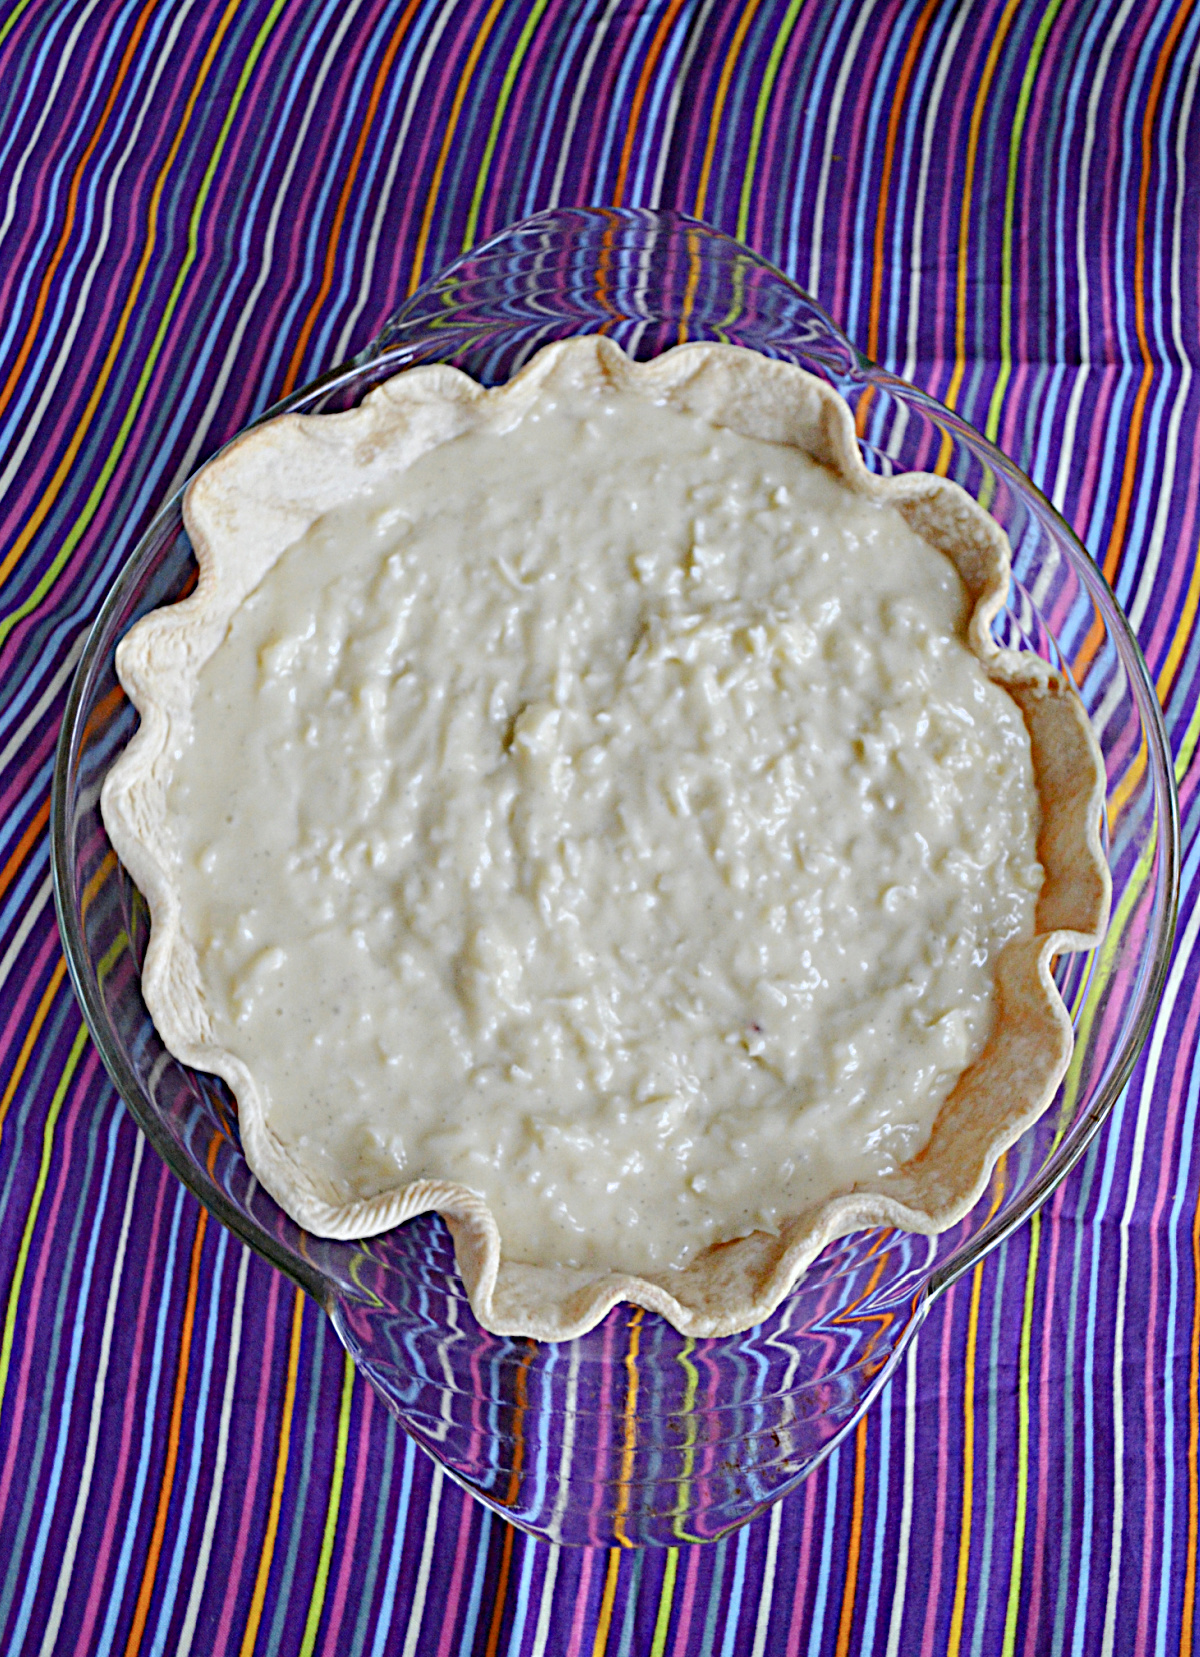 A baked pie crust.